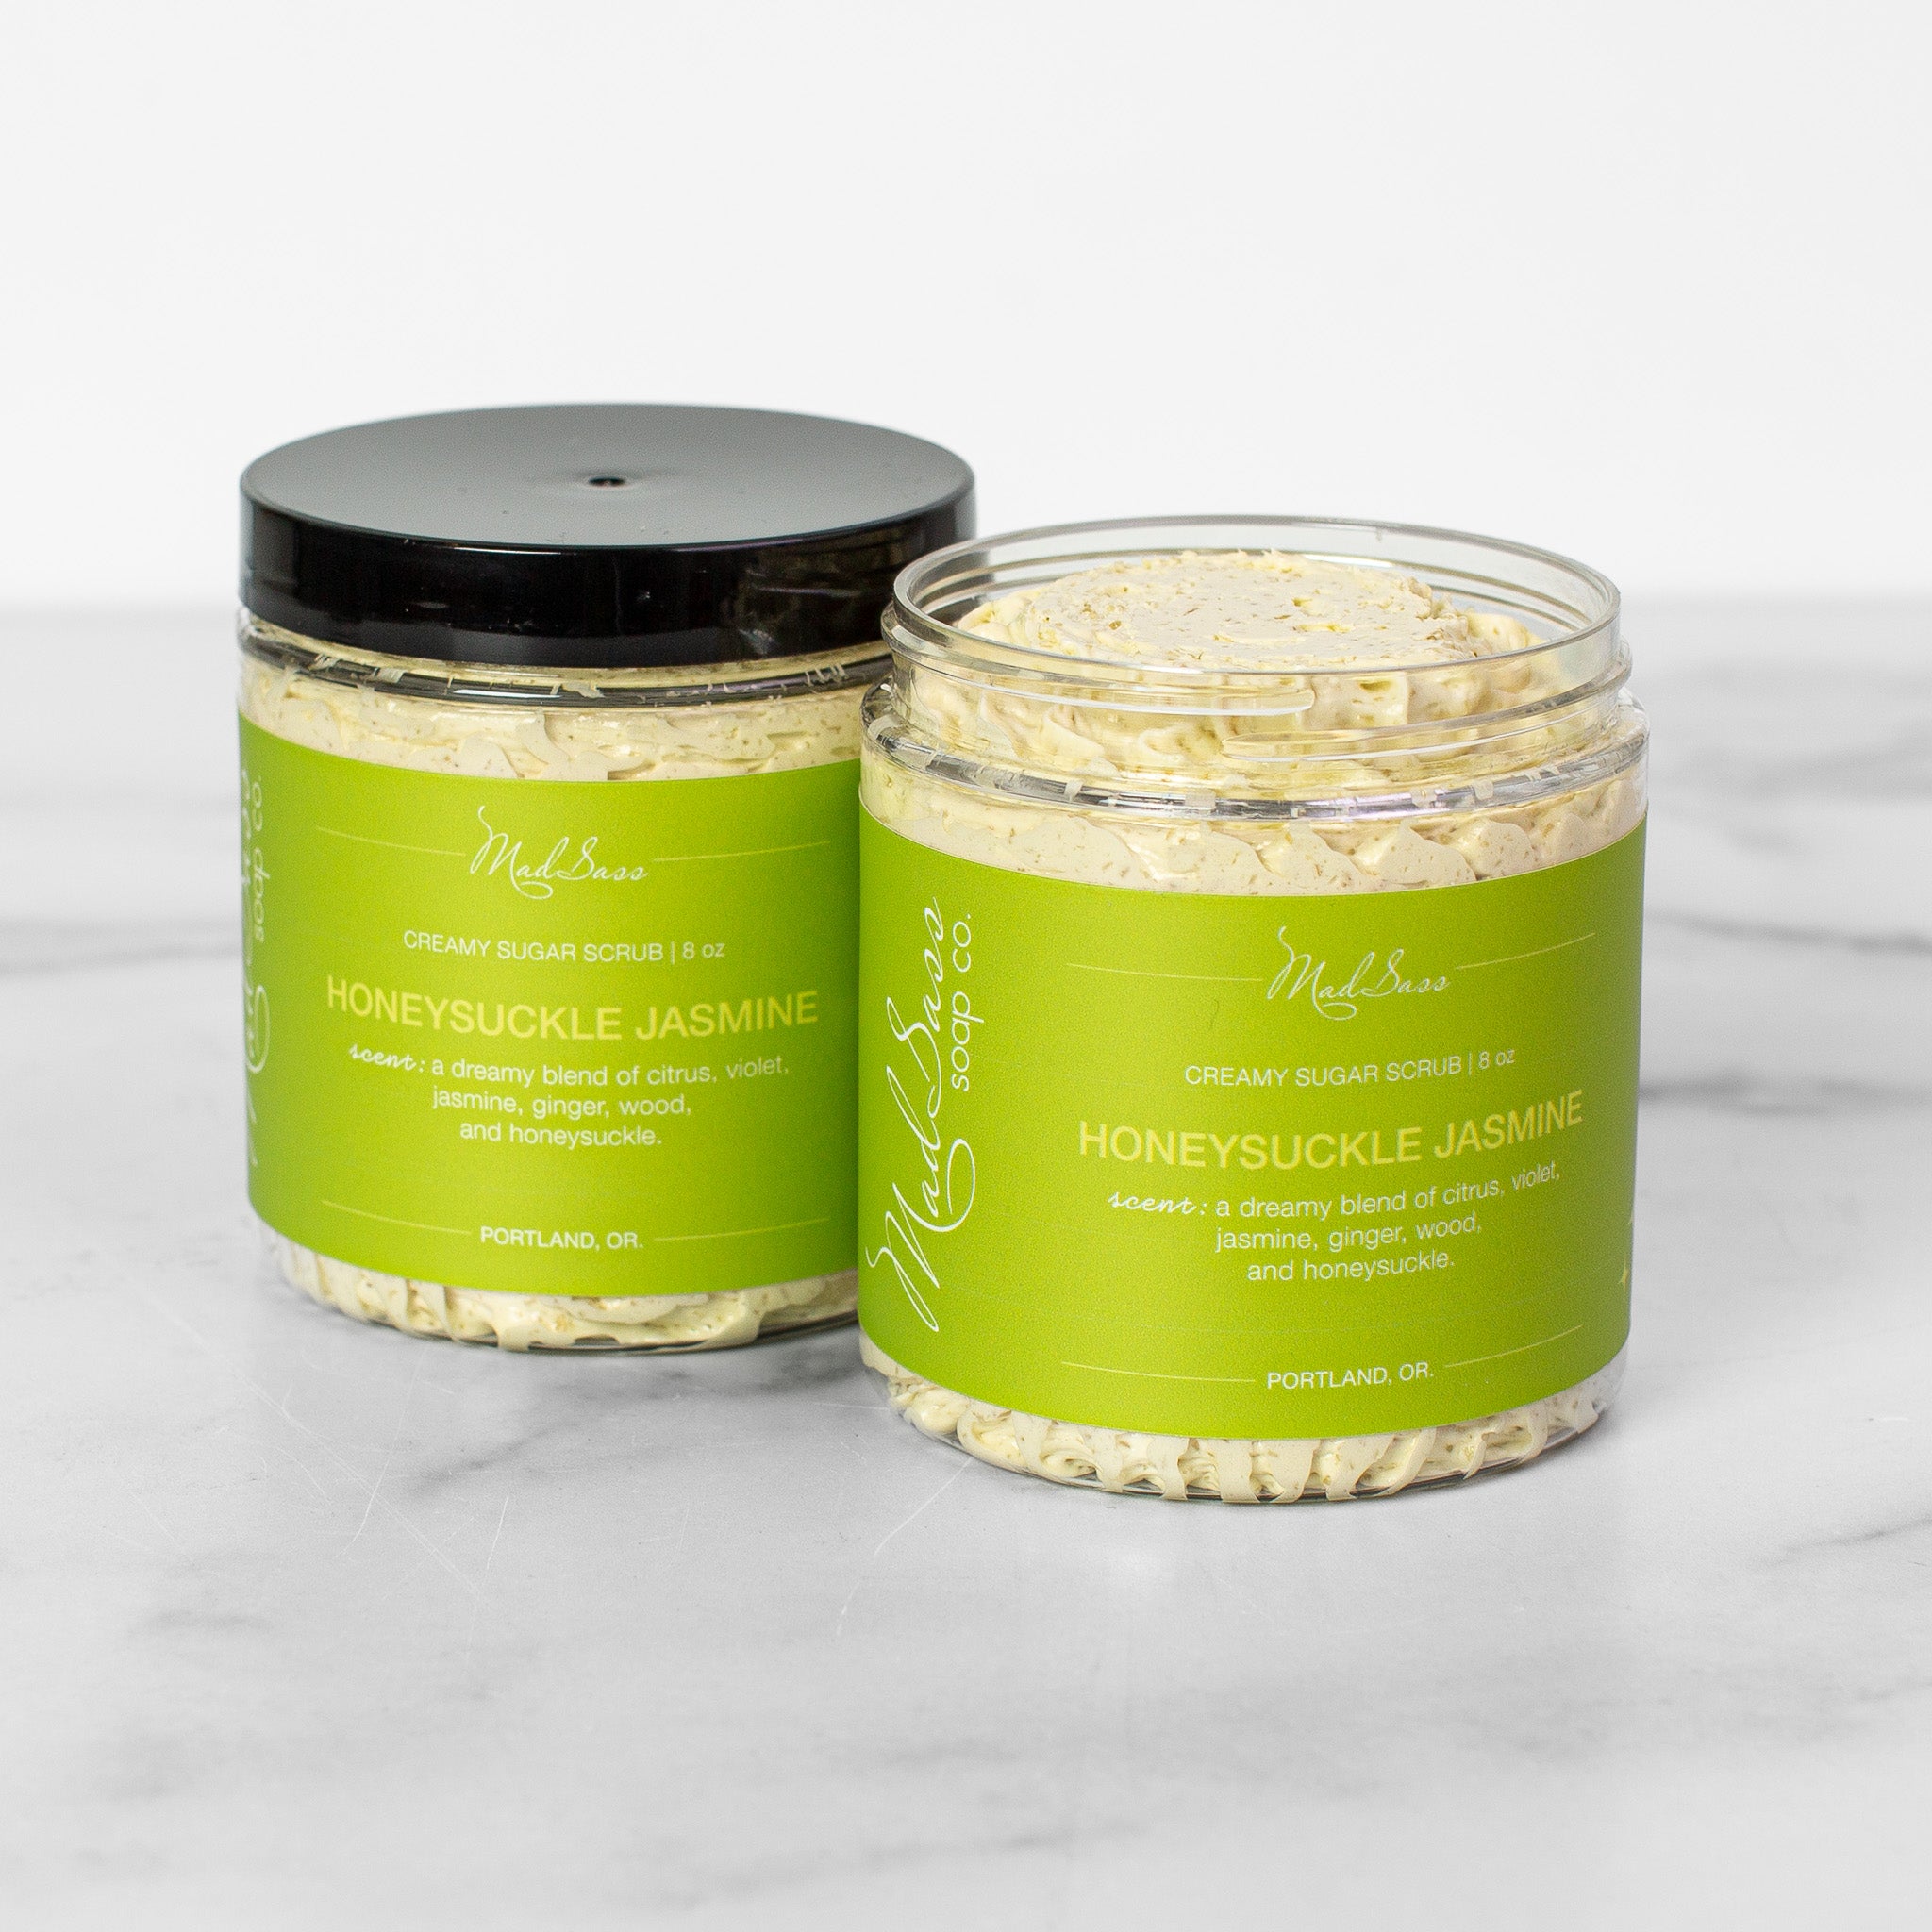 Two containers of Honeysuckle Jasmine Creamy Sugar Scrubs on a white background. Honeysuckle Jasmine is a light green scrub in a clear tub with a black lid.